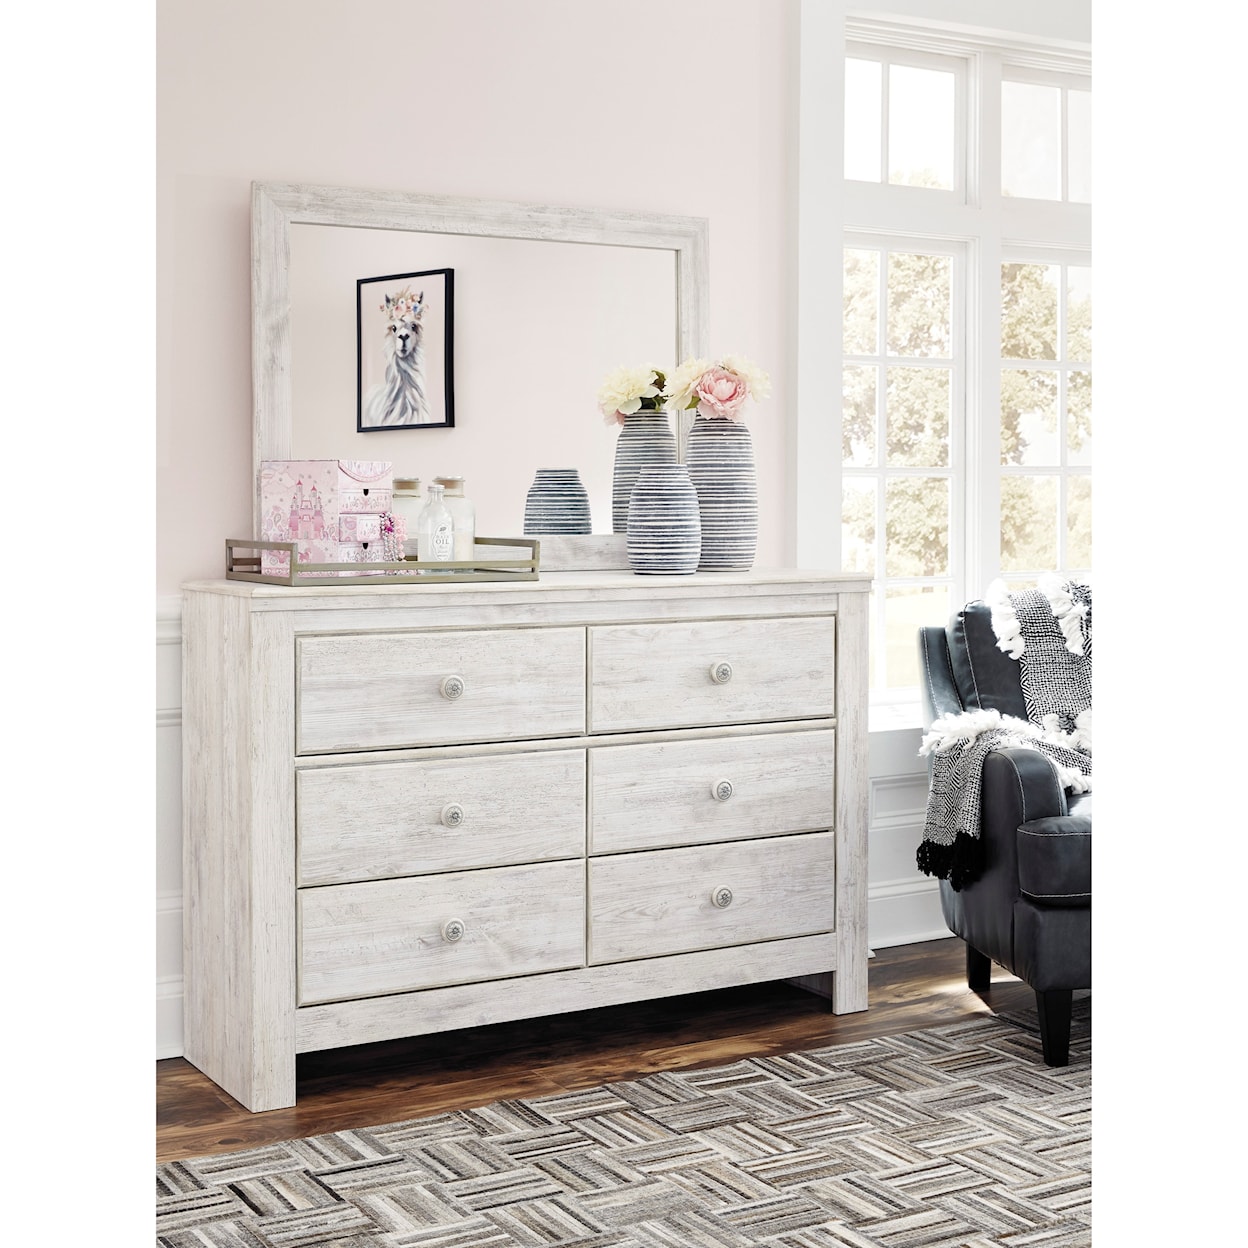 Signature Design by Ashley Furniture Paxberry Dresser & Bedroom Mirror